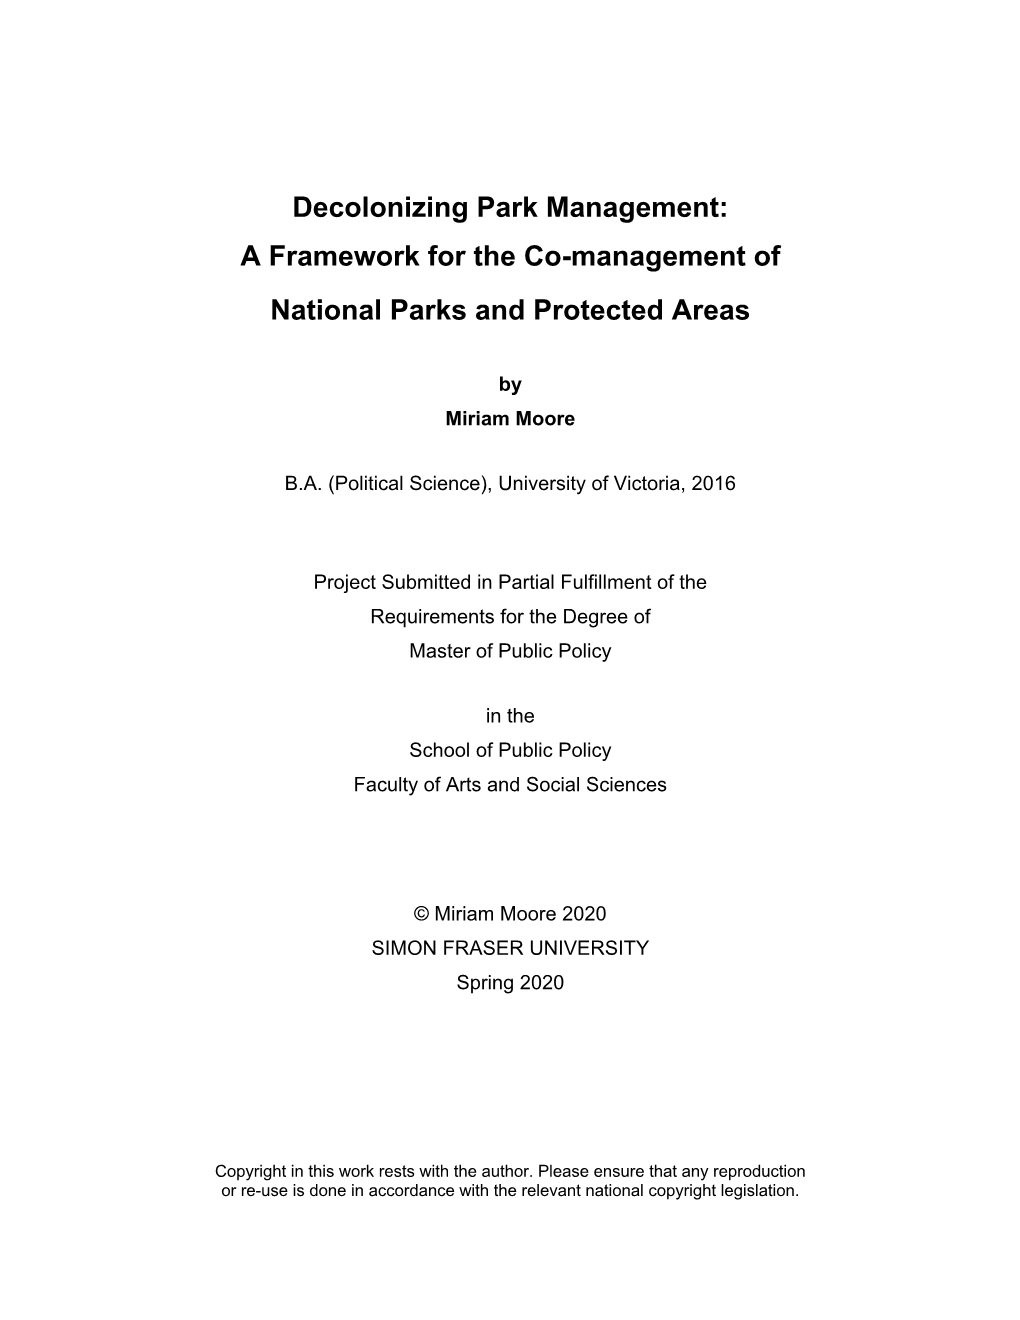 A Framework for the Co-Management of National Parks and Protected Areas